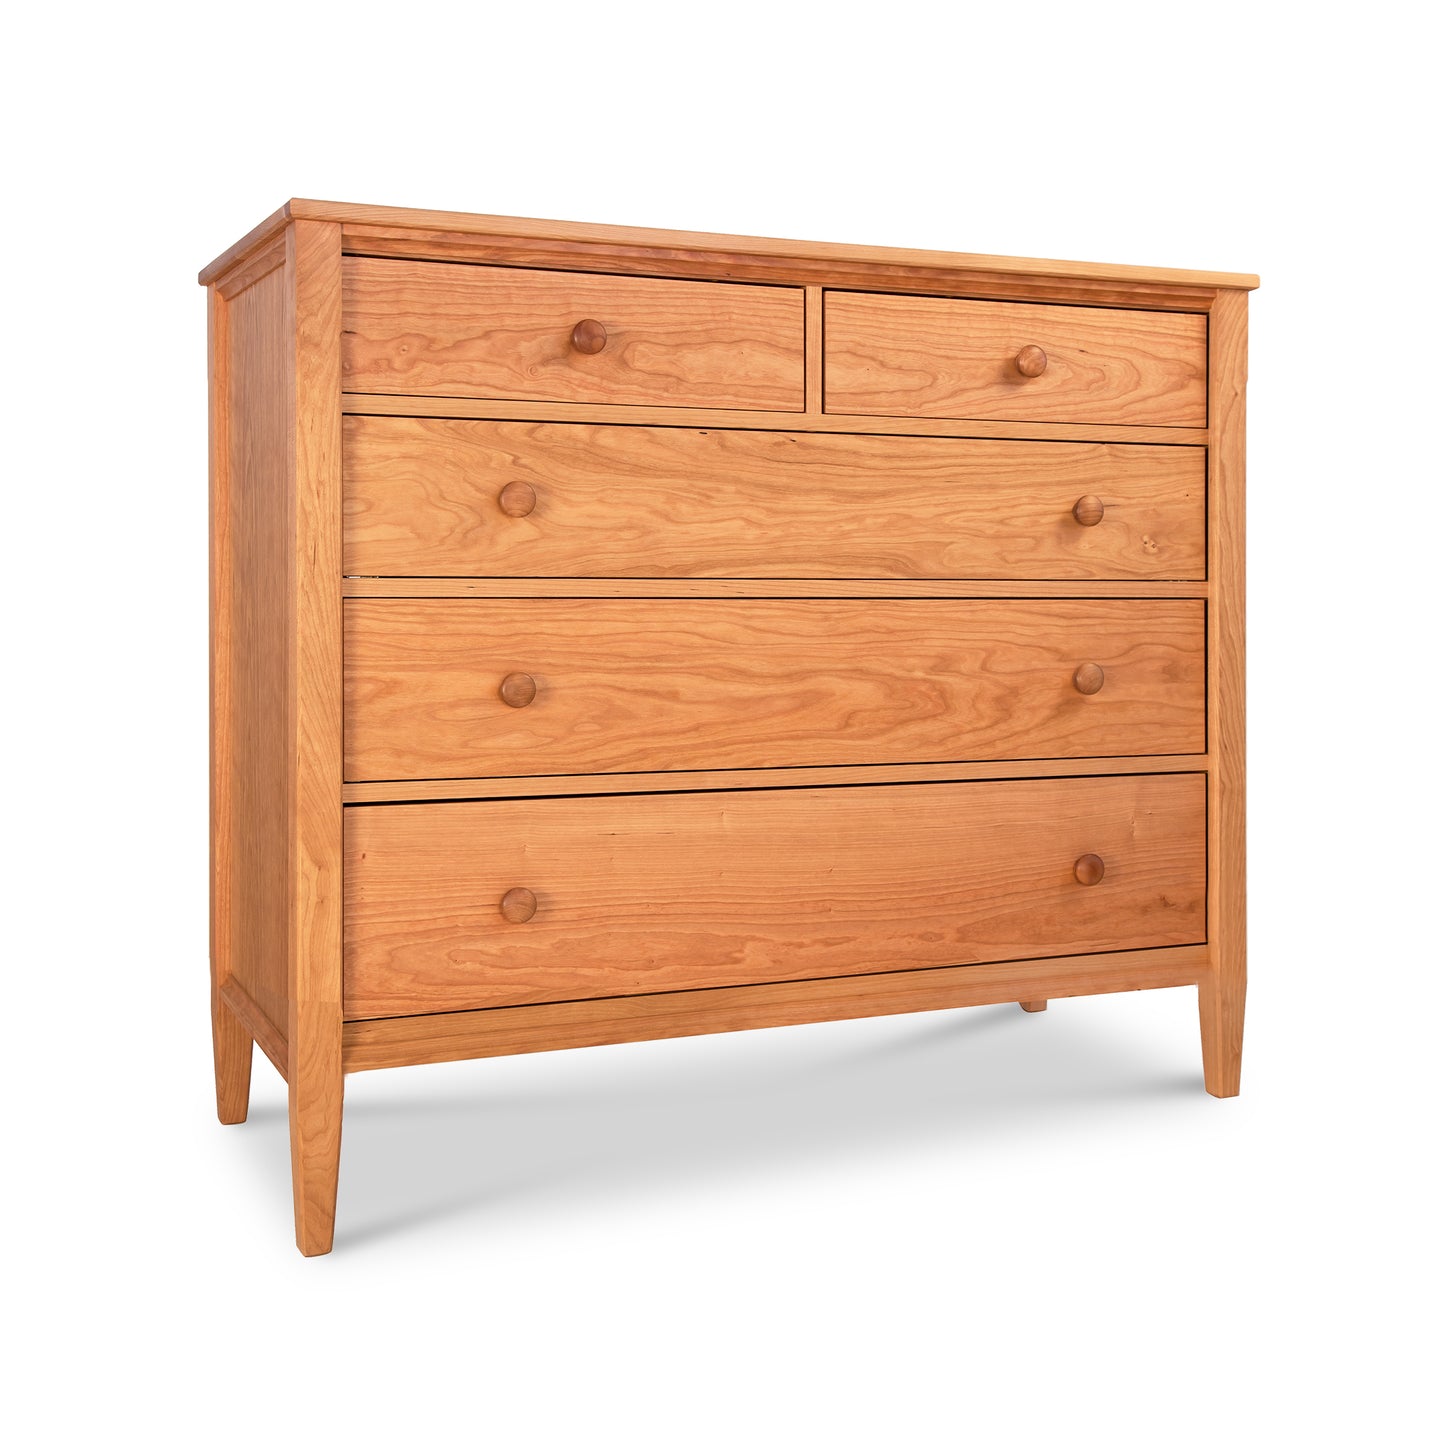 A Maple Corner Woodworks Vermont Shaker Extra Wide Chest of Drawers on a white background.